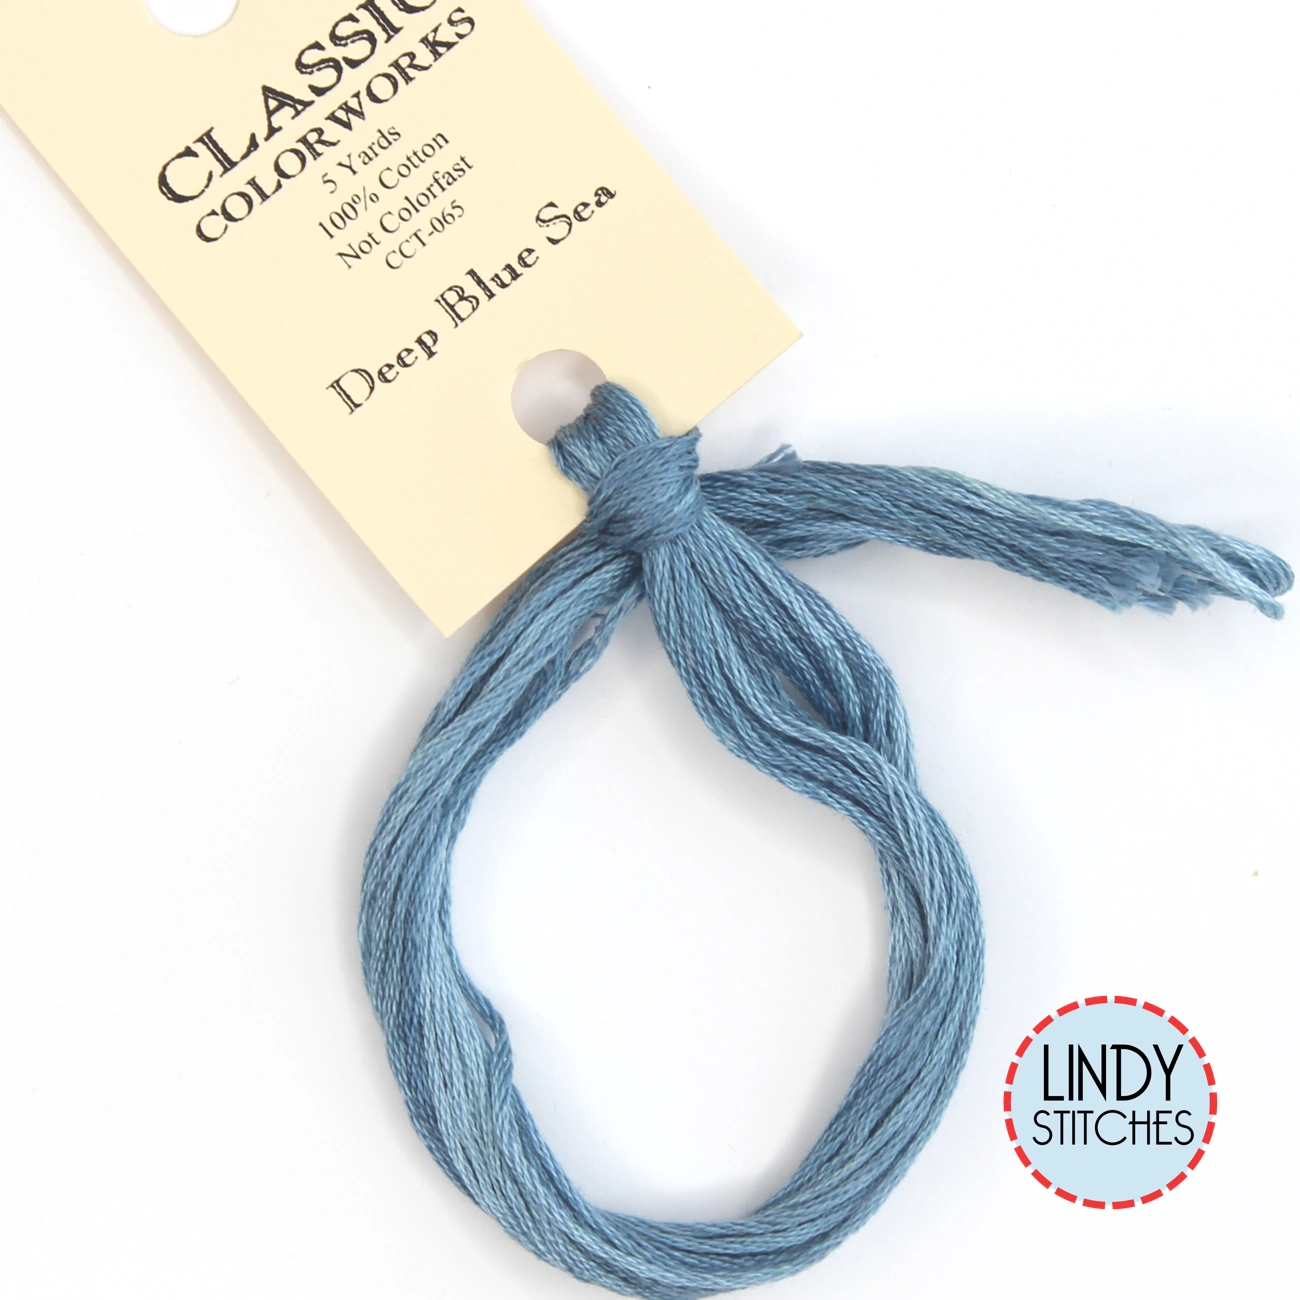 Deep Blue Sea Classic Colorworks Floss Hand Dyed Cotton Skein